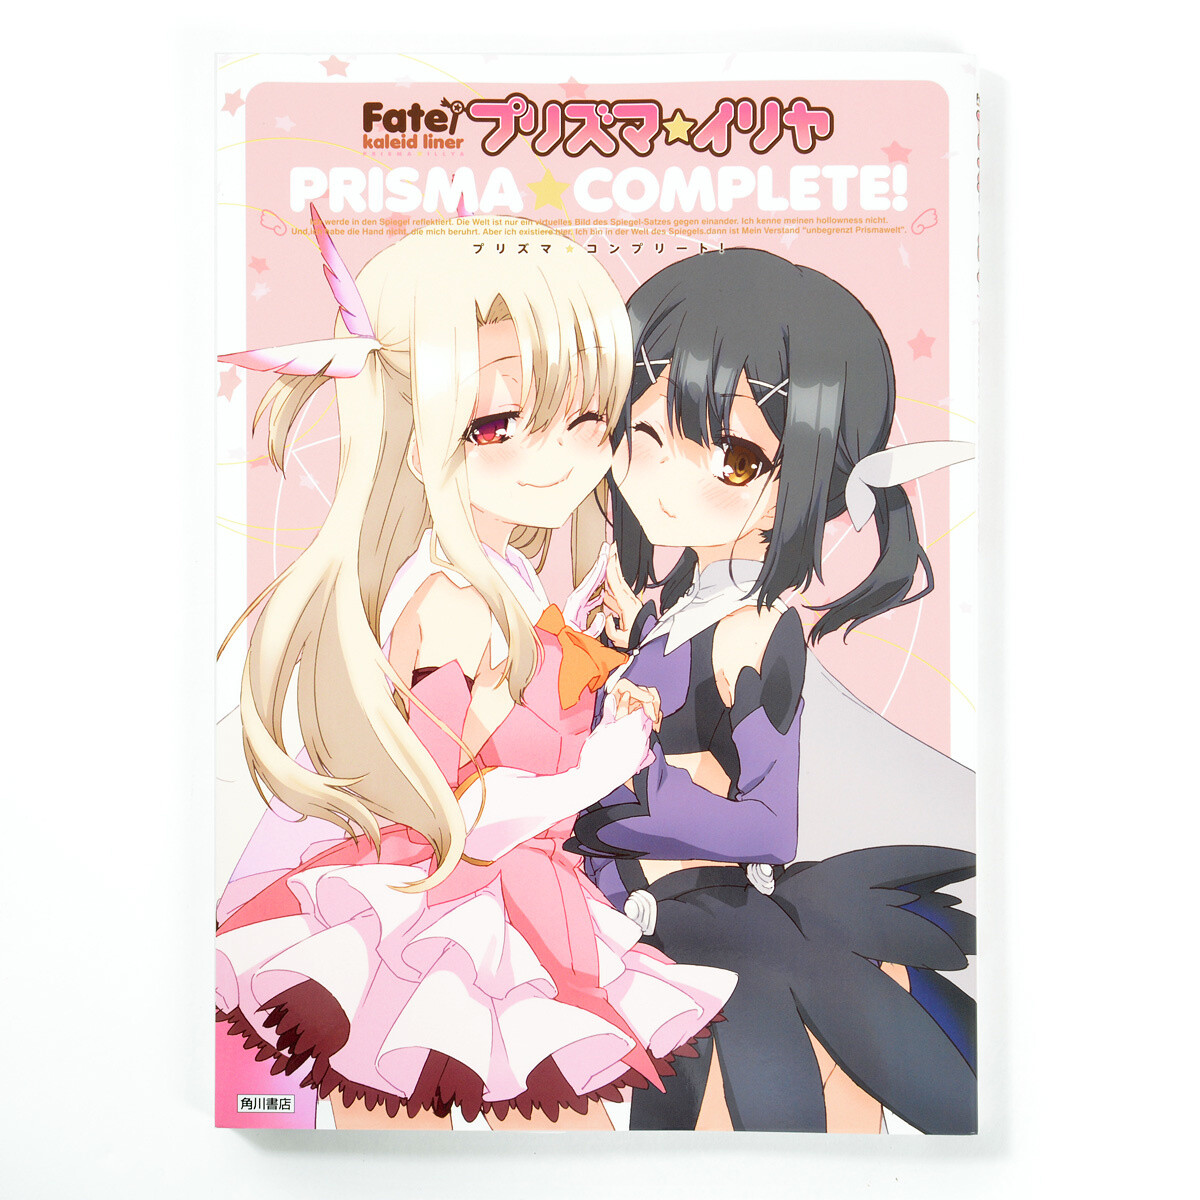 More Than Meets The Eye: 'Fate/Kaleid Liner Prisma Illya' – COMICON